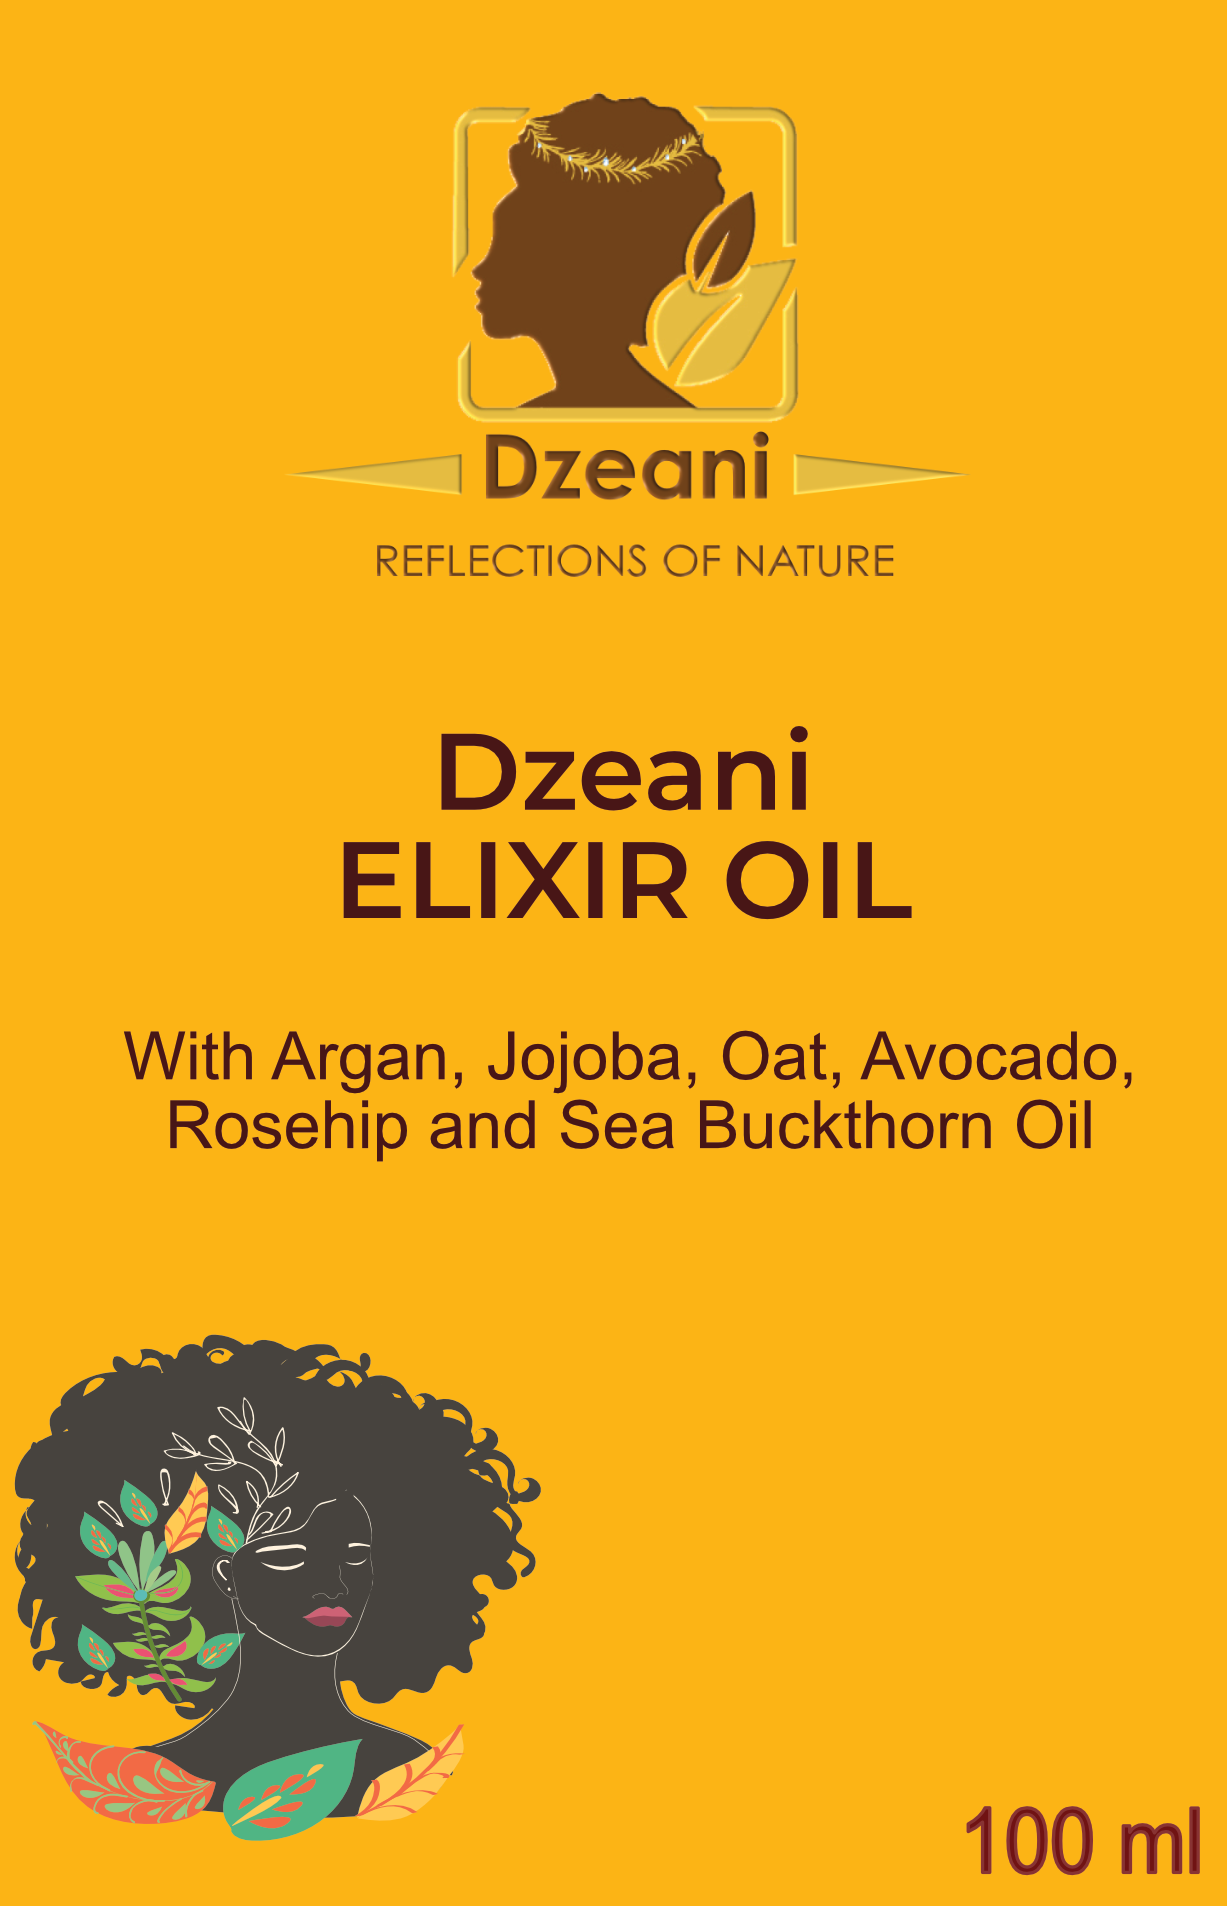 Dzeani team has carefully selected for you the essential products that you will need to take care of your curls - Dzeani -